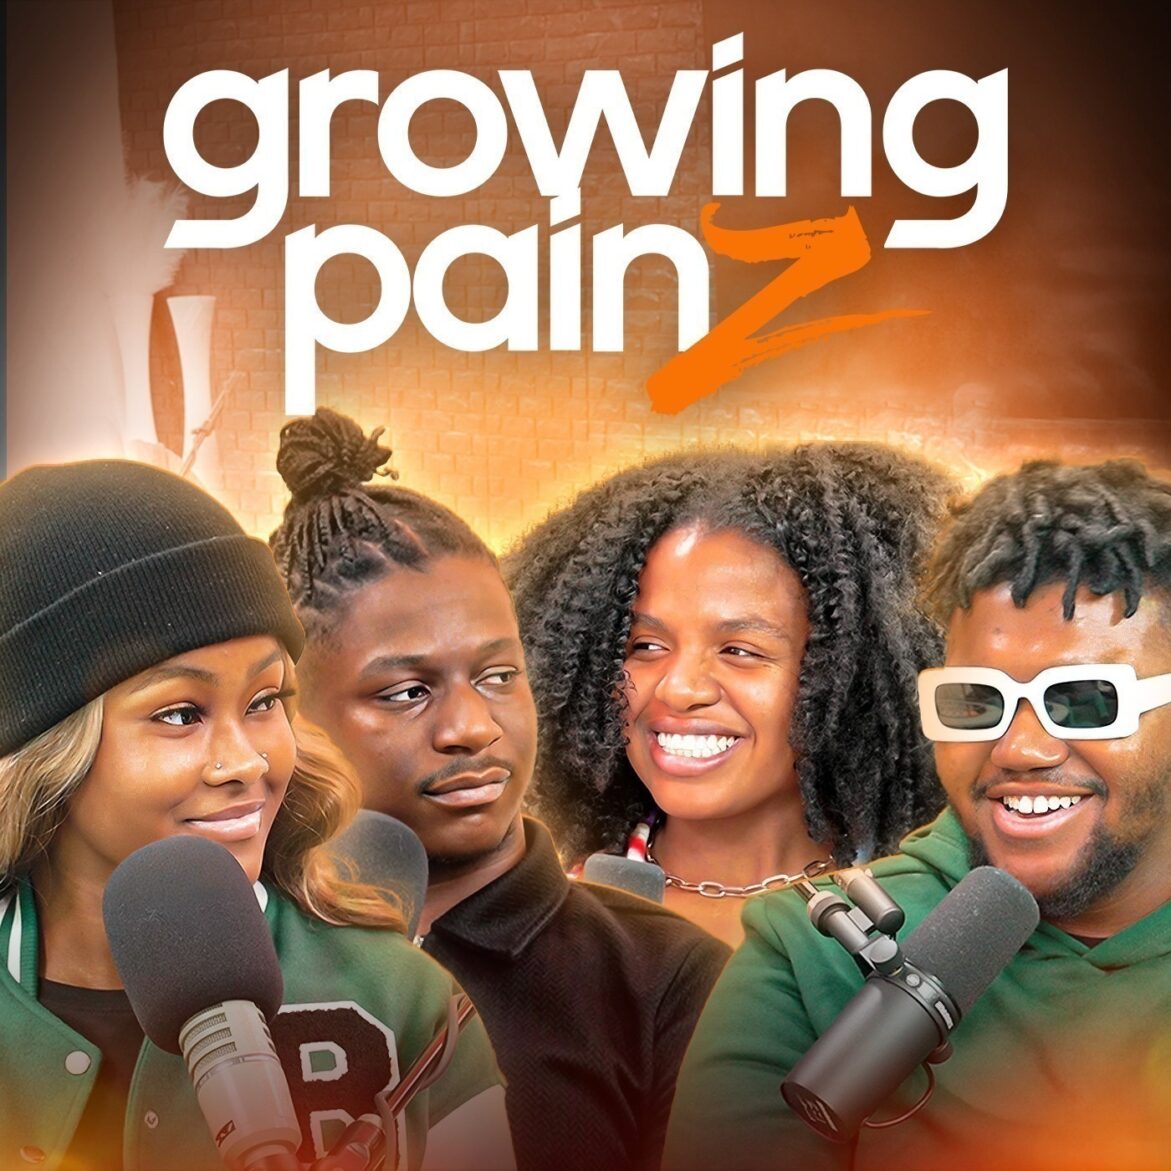 Black Podcasting - Gen Z Is Getting Rich On OnlyFans - Growing Painz